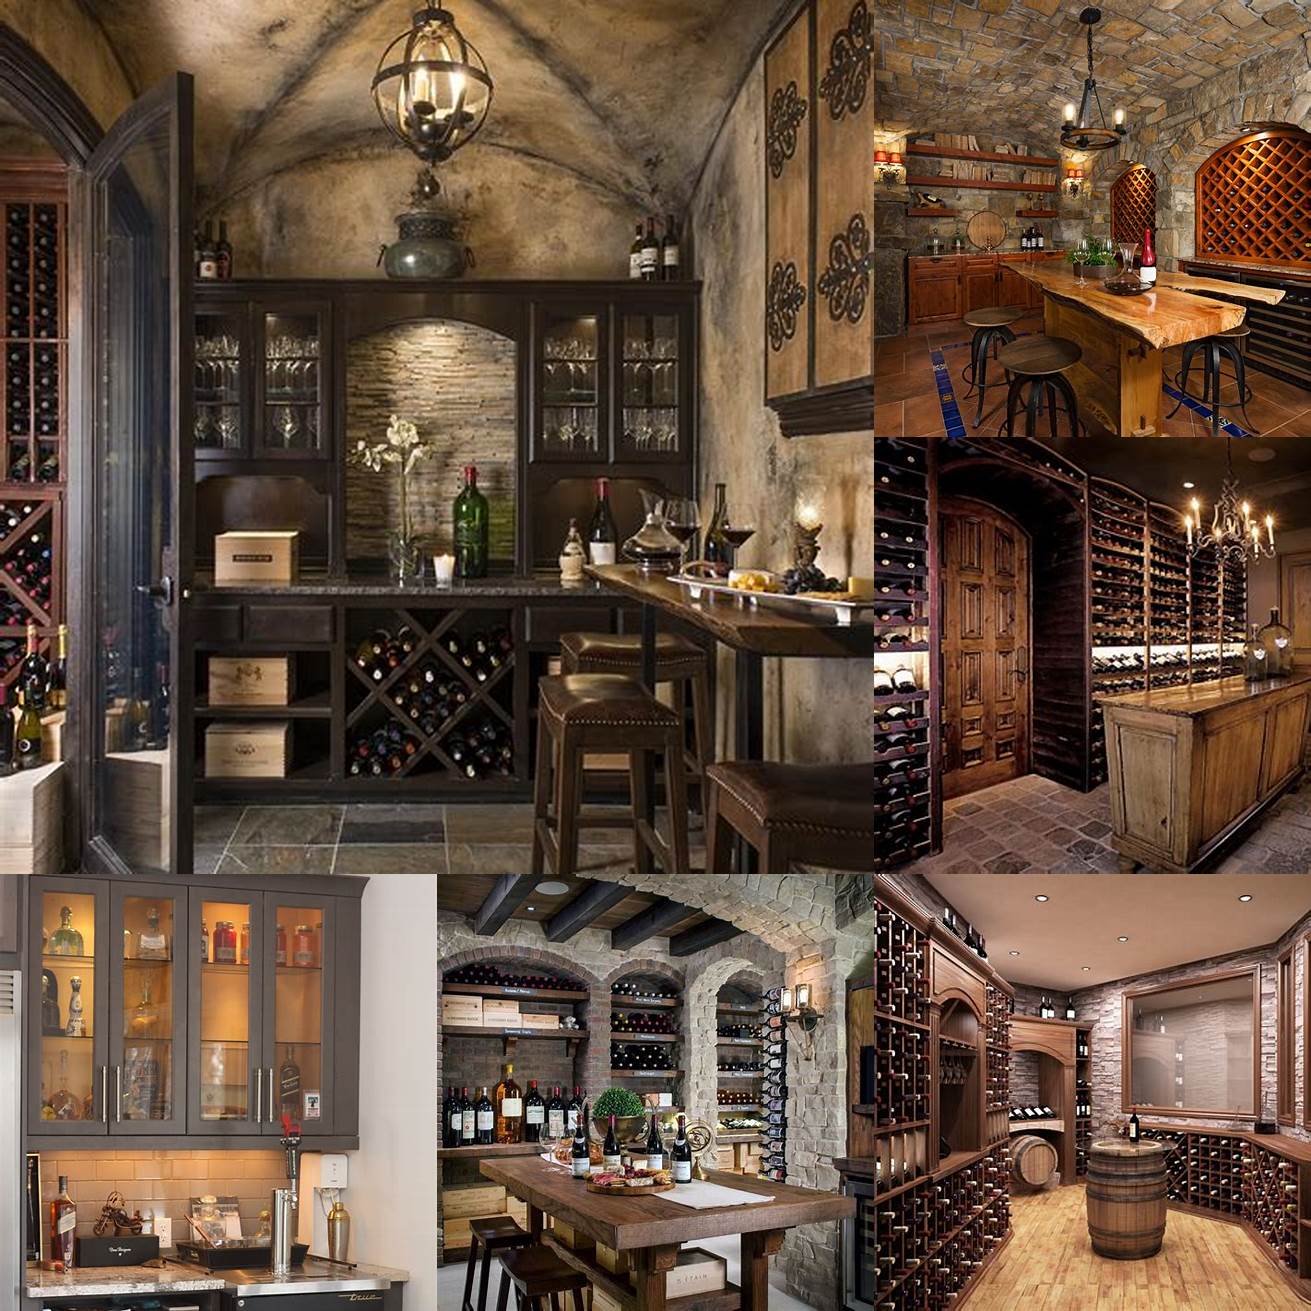 Image Idea 5 Wine cabinet with a rustic style